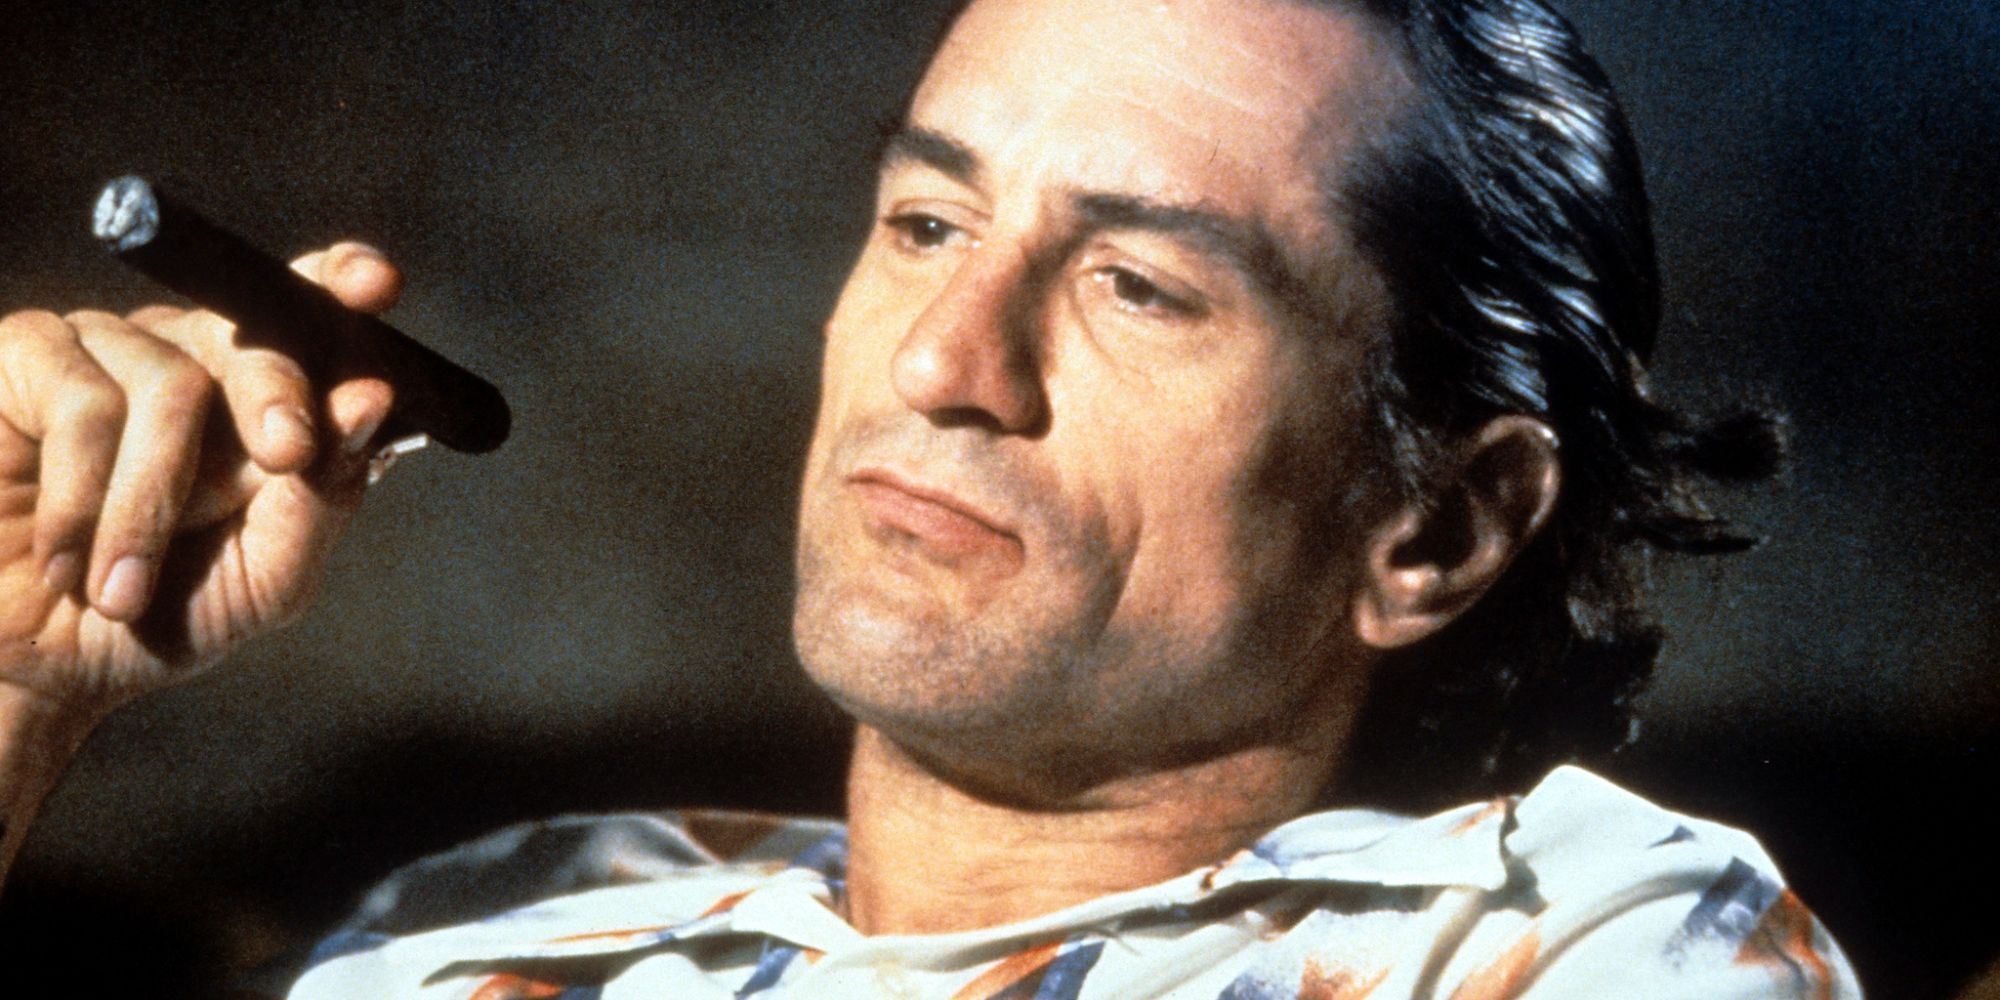 Robert De Niro as Max Caddy sitting in a theater smoking in Cape Fear